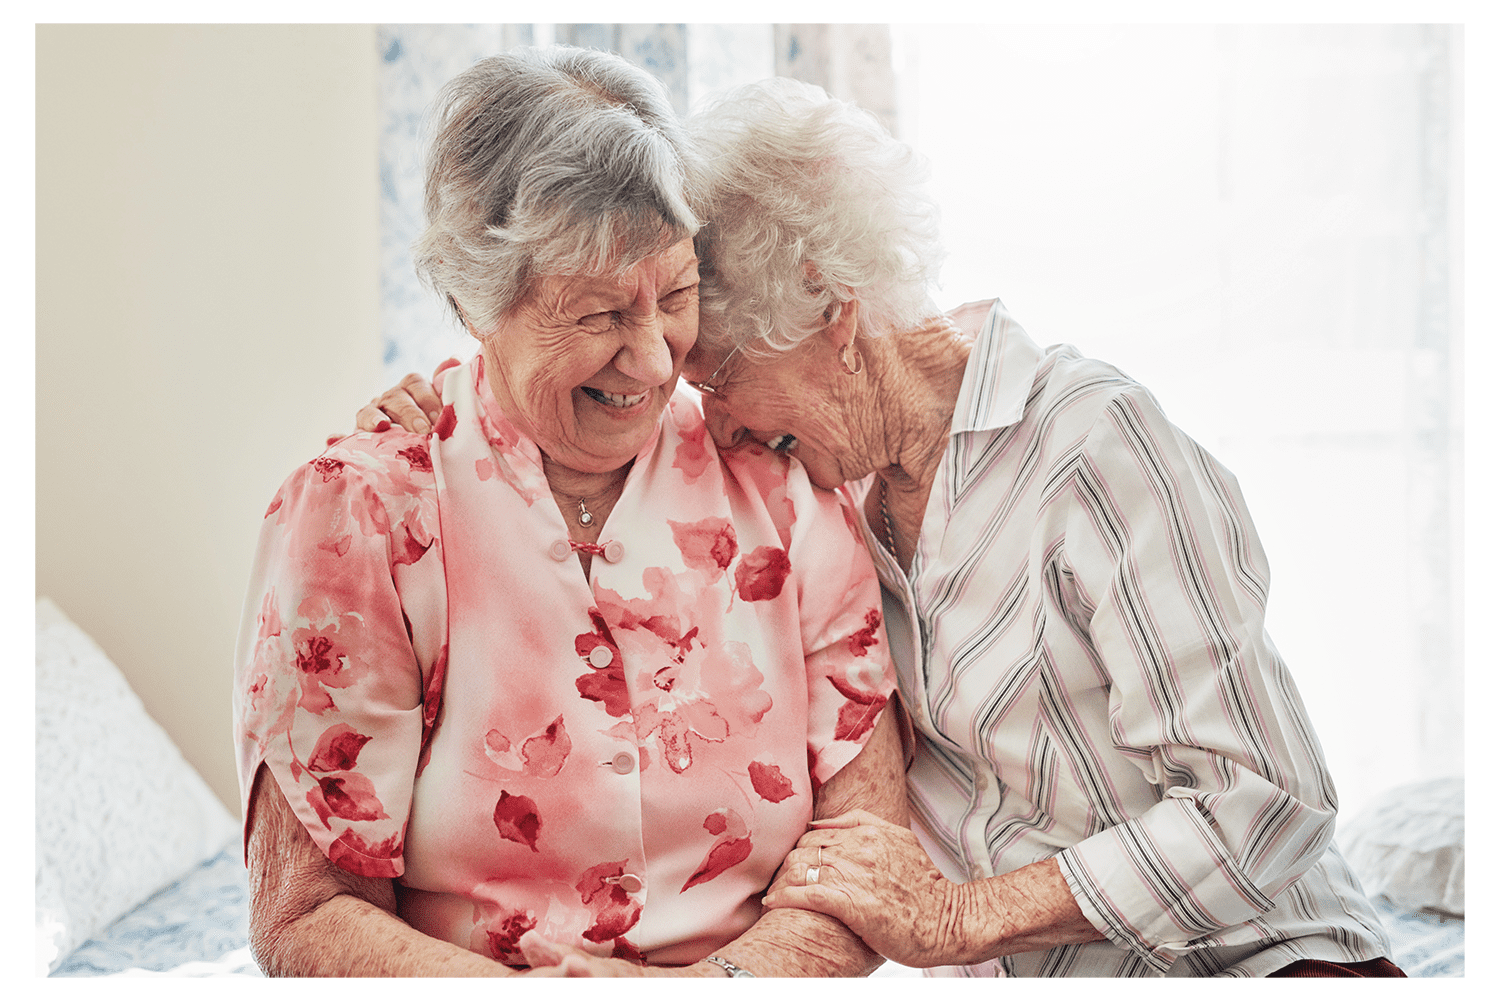 An elderly couple laughing